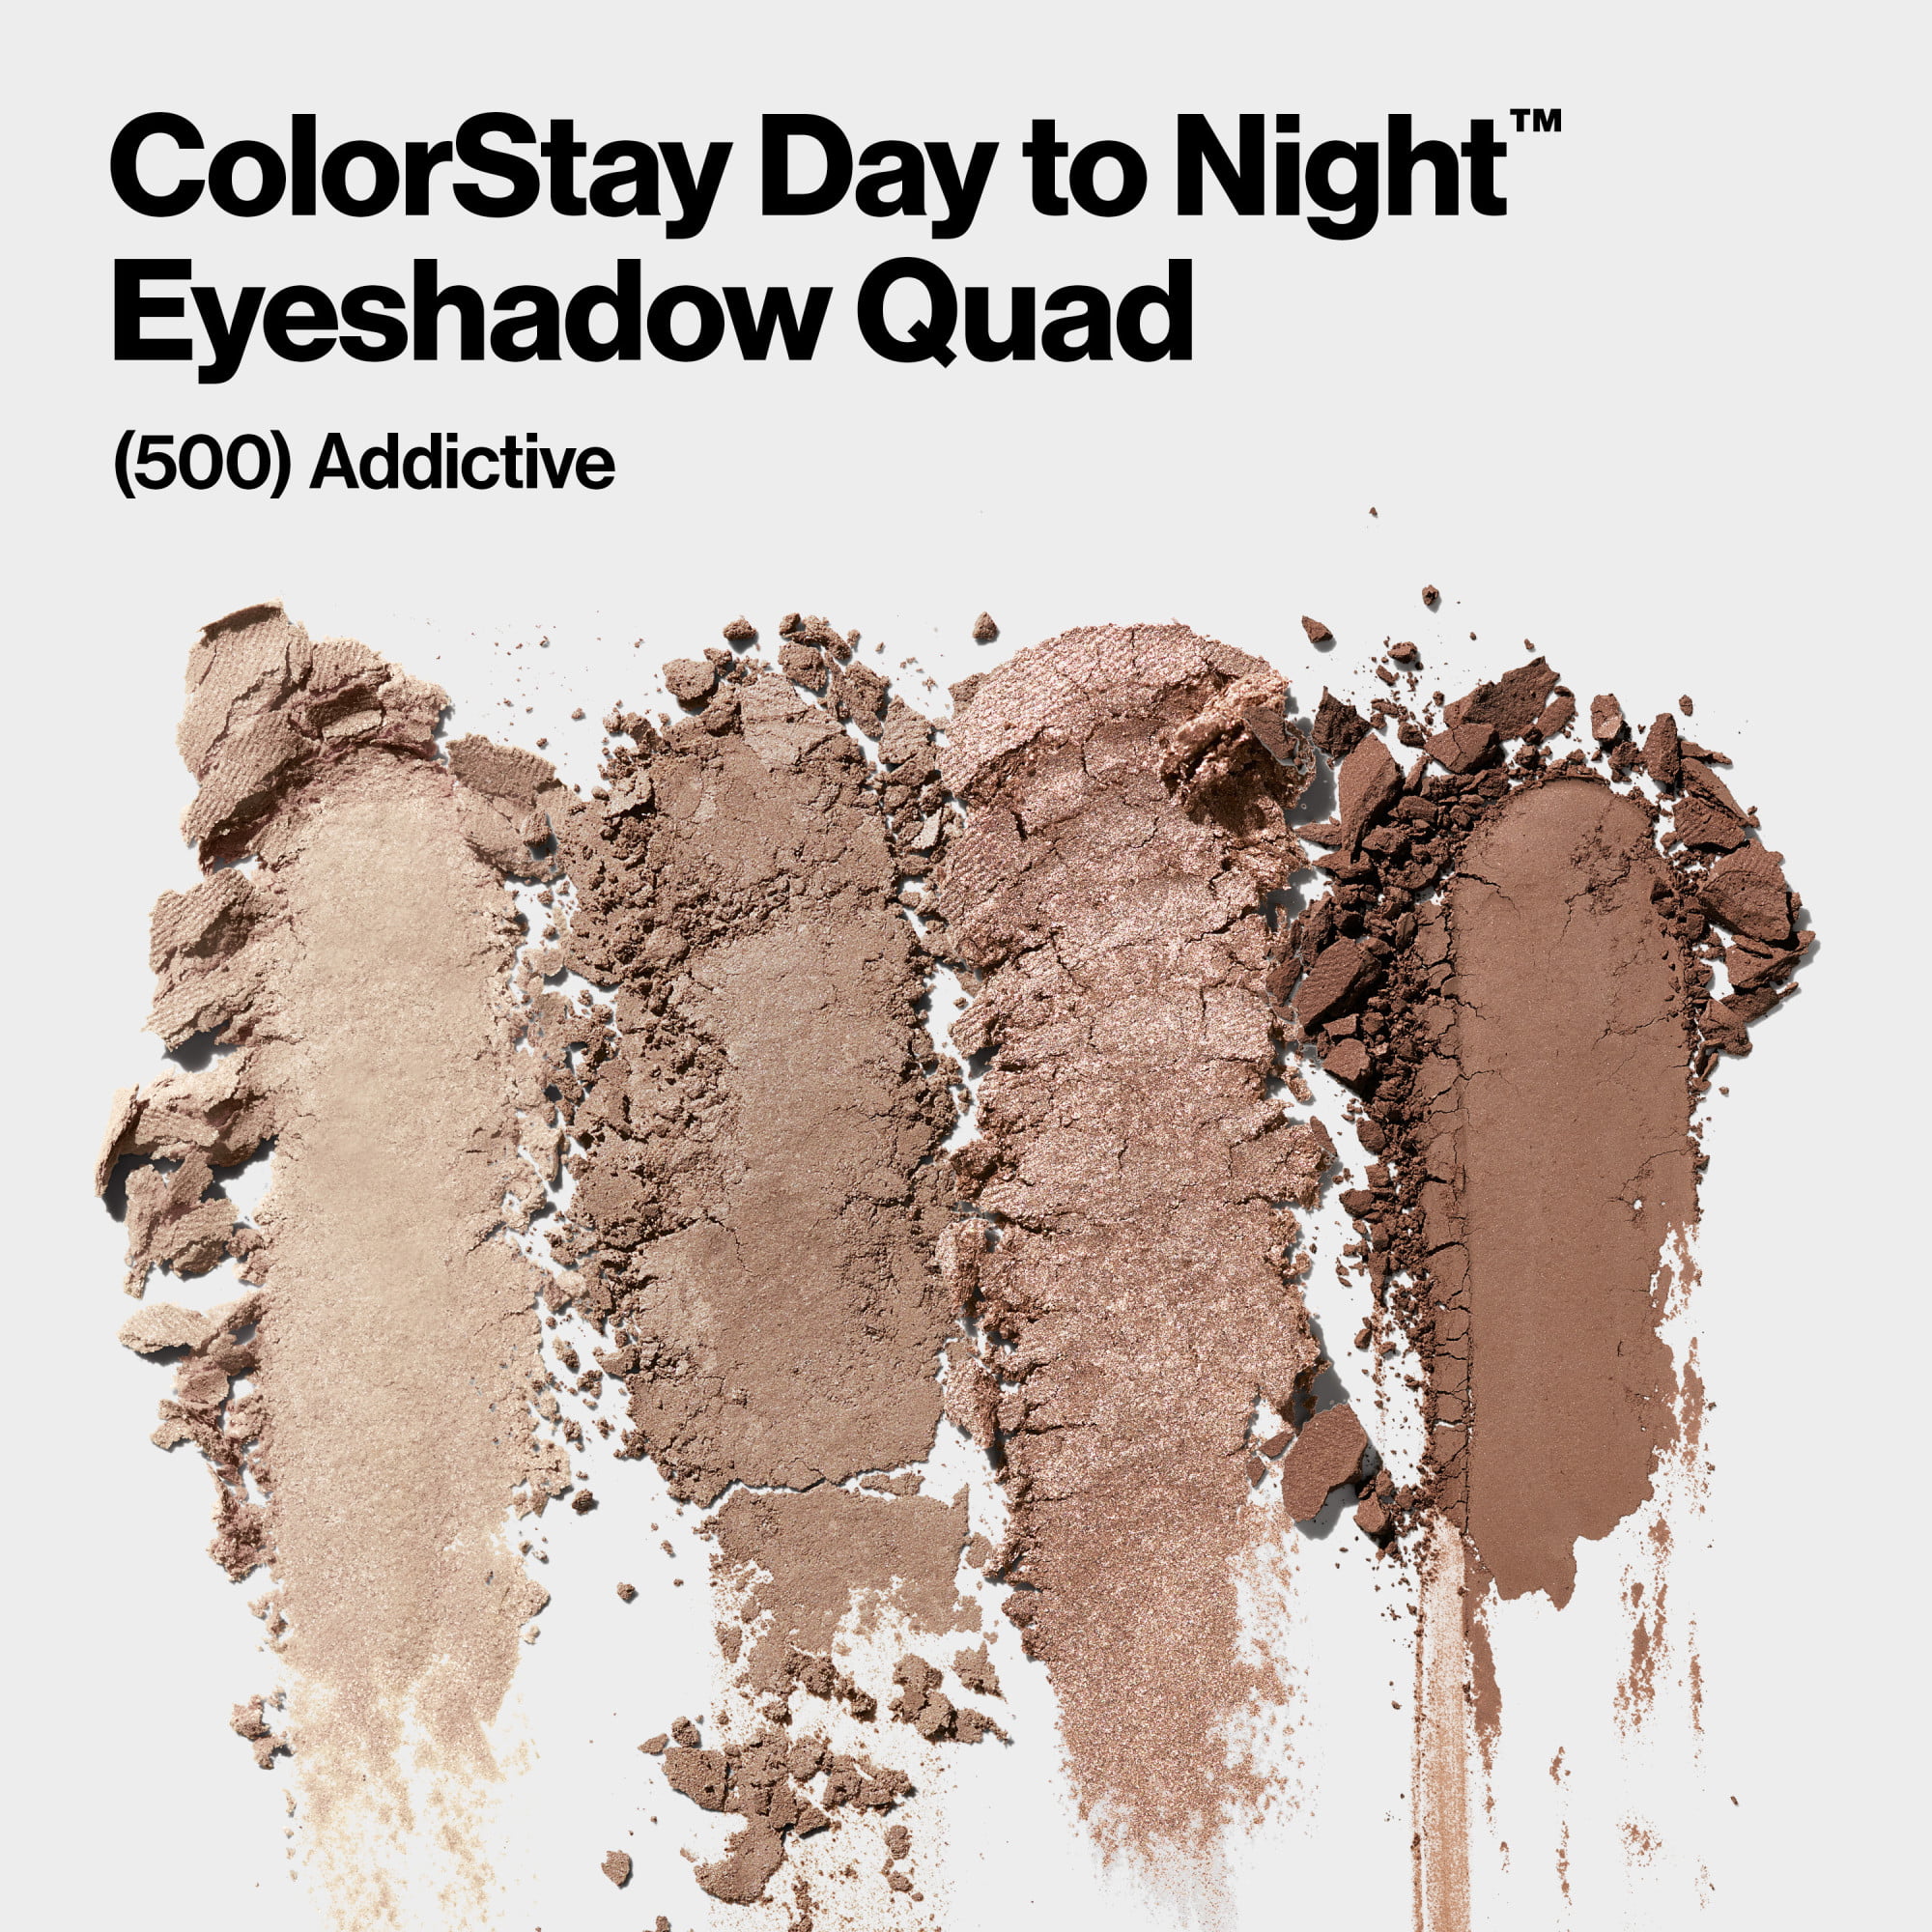 Revlon ColorStay Day to Night Long Lasting Matte and Shimmer Eyeshadow Quad, 500 Addictive - image 3 of 13